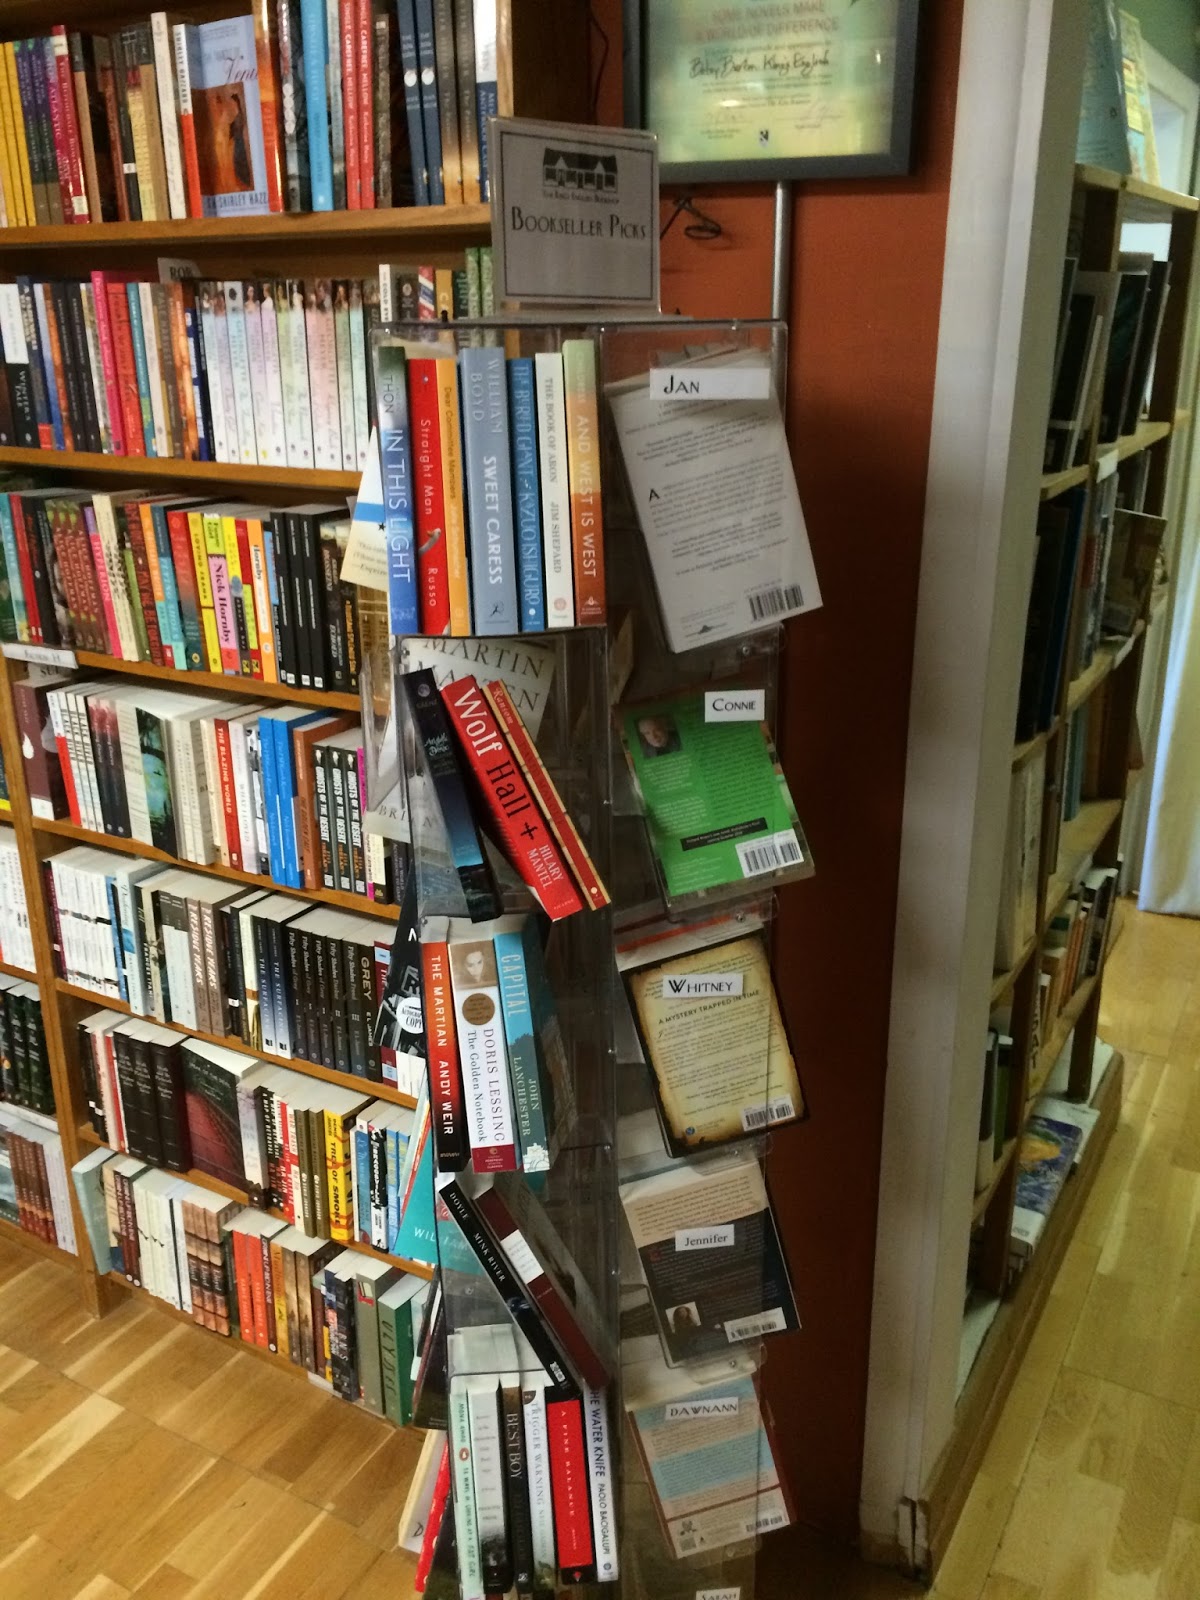 Bookselling Profile: The King's English Bookshop